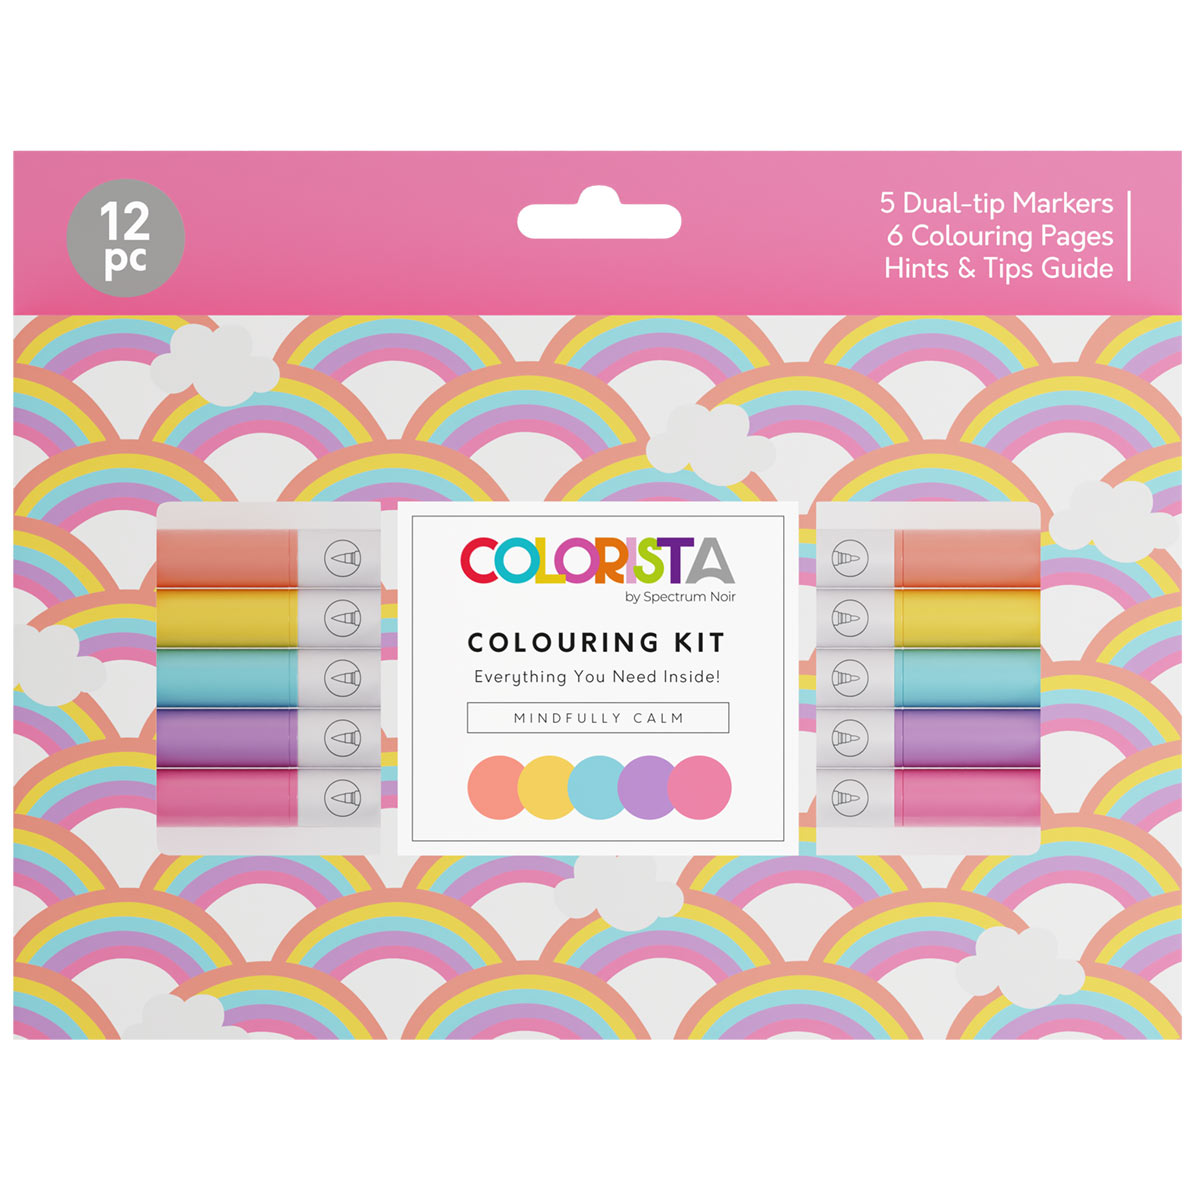 Spectrum Noir Colorista - Colouring Kit - Dual-tip Alcohol Brush Markers  - Mindfully Calm